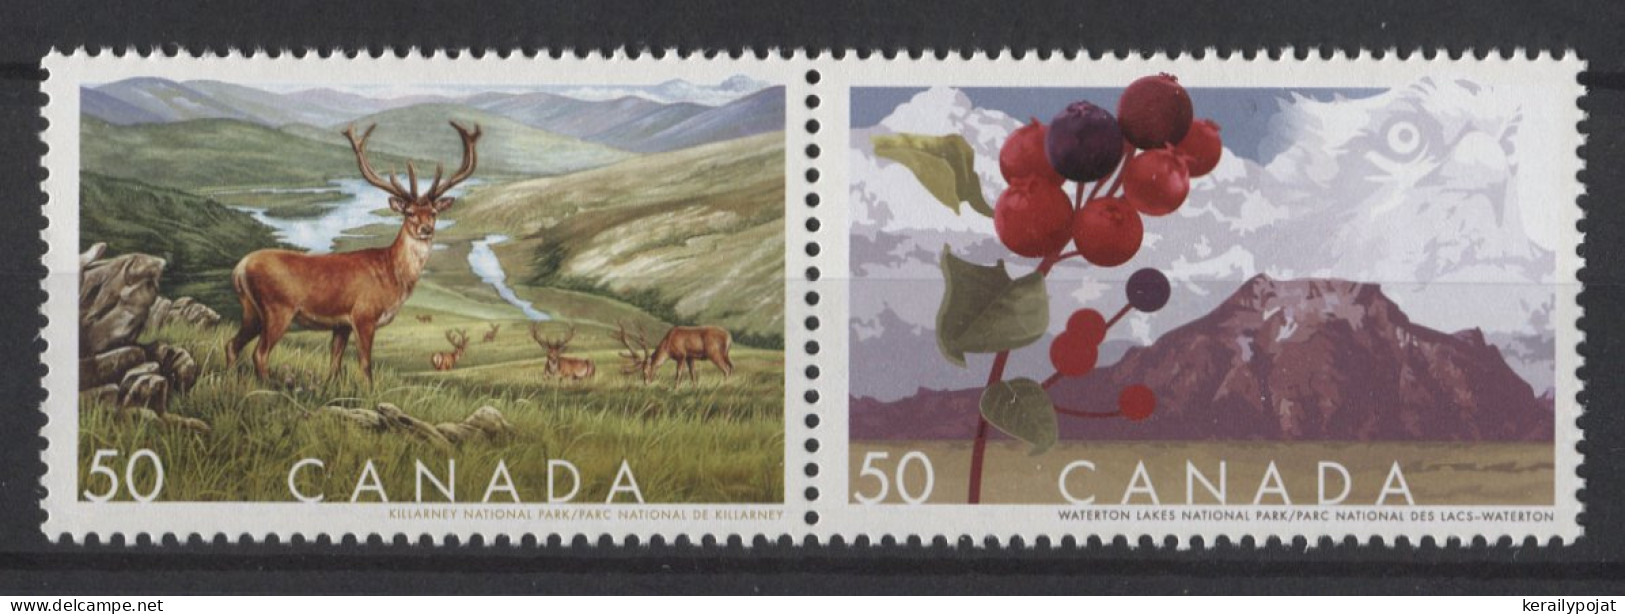 Canada - 2005 National Parks Pair MNH__(TH-24871) - Unused Stamps